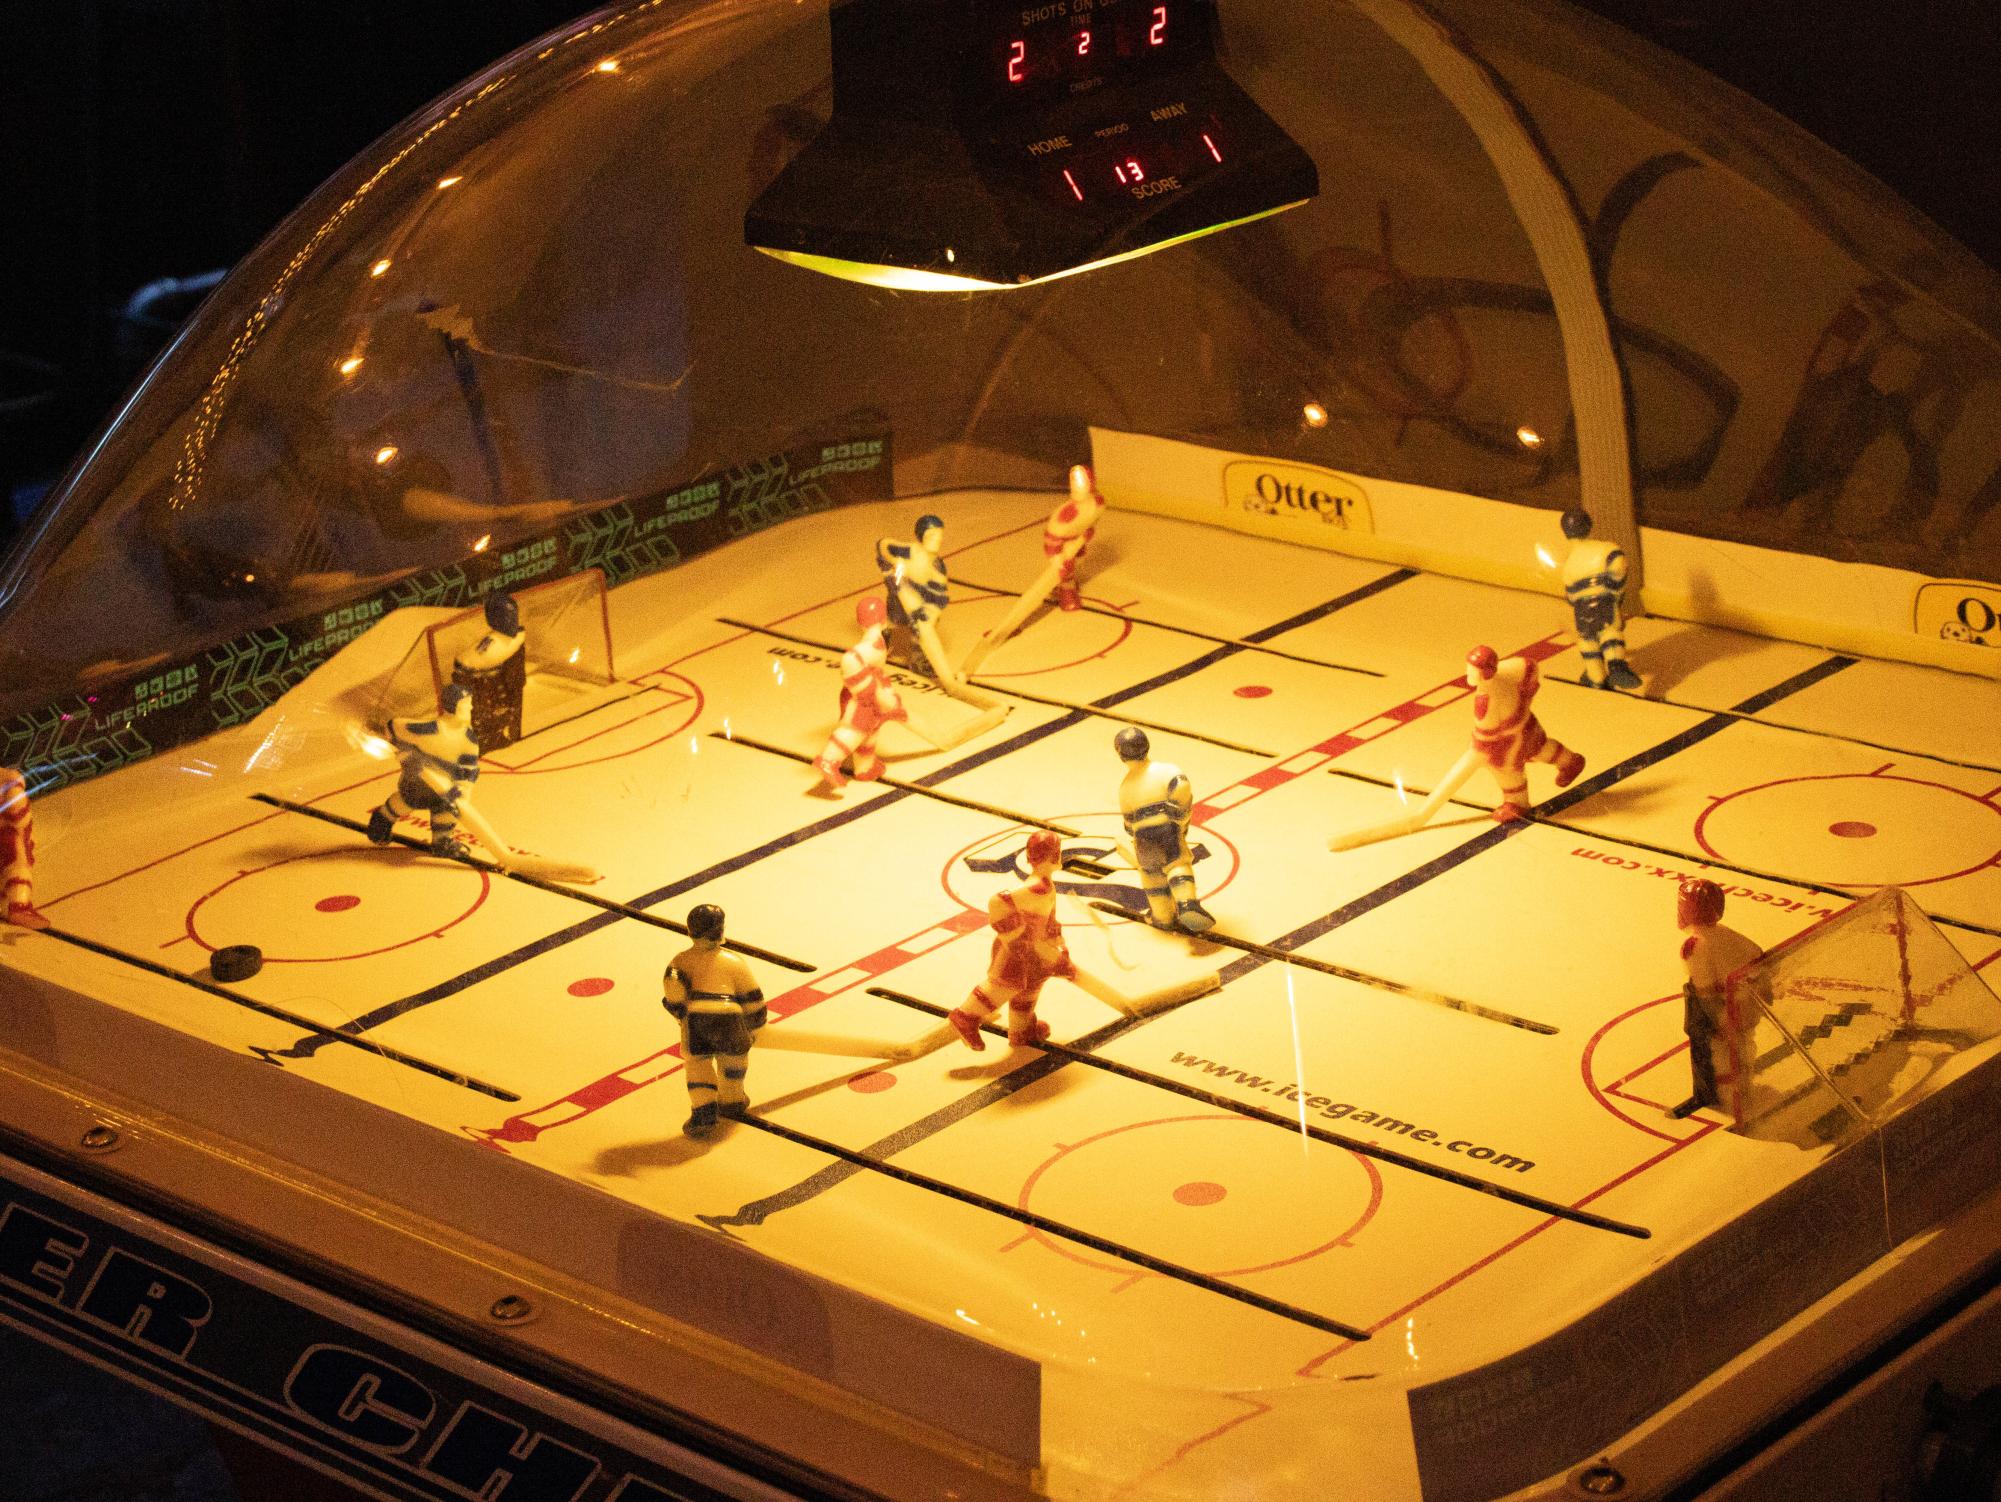 Super Chexx table hockey game Jan. 29.